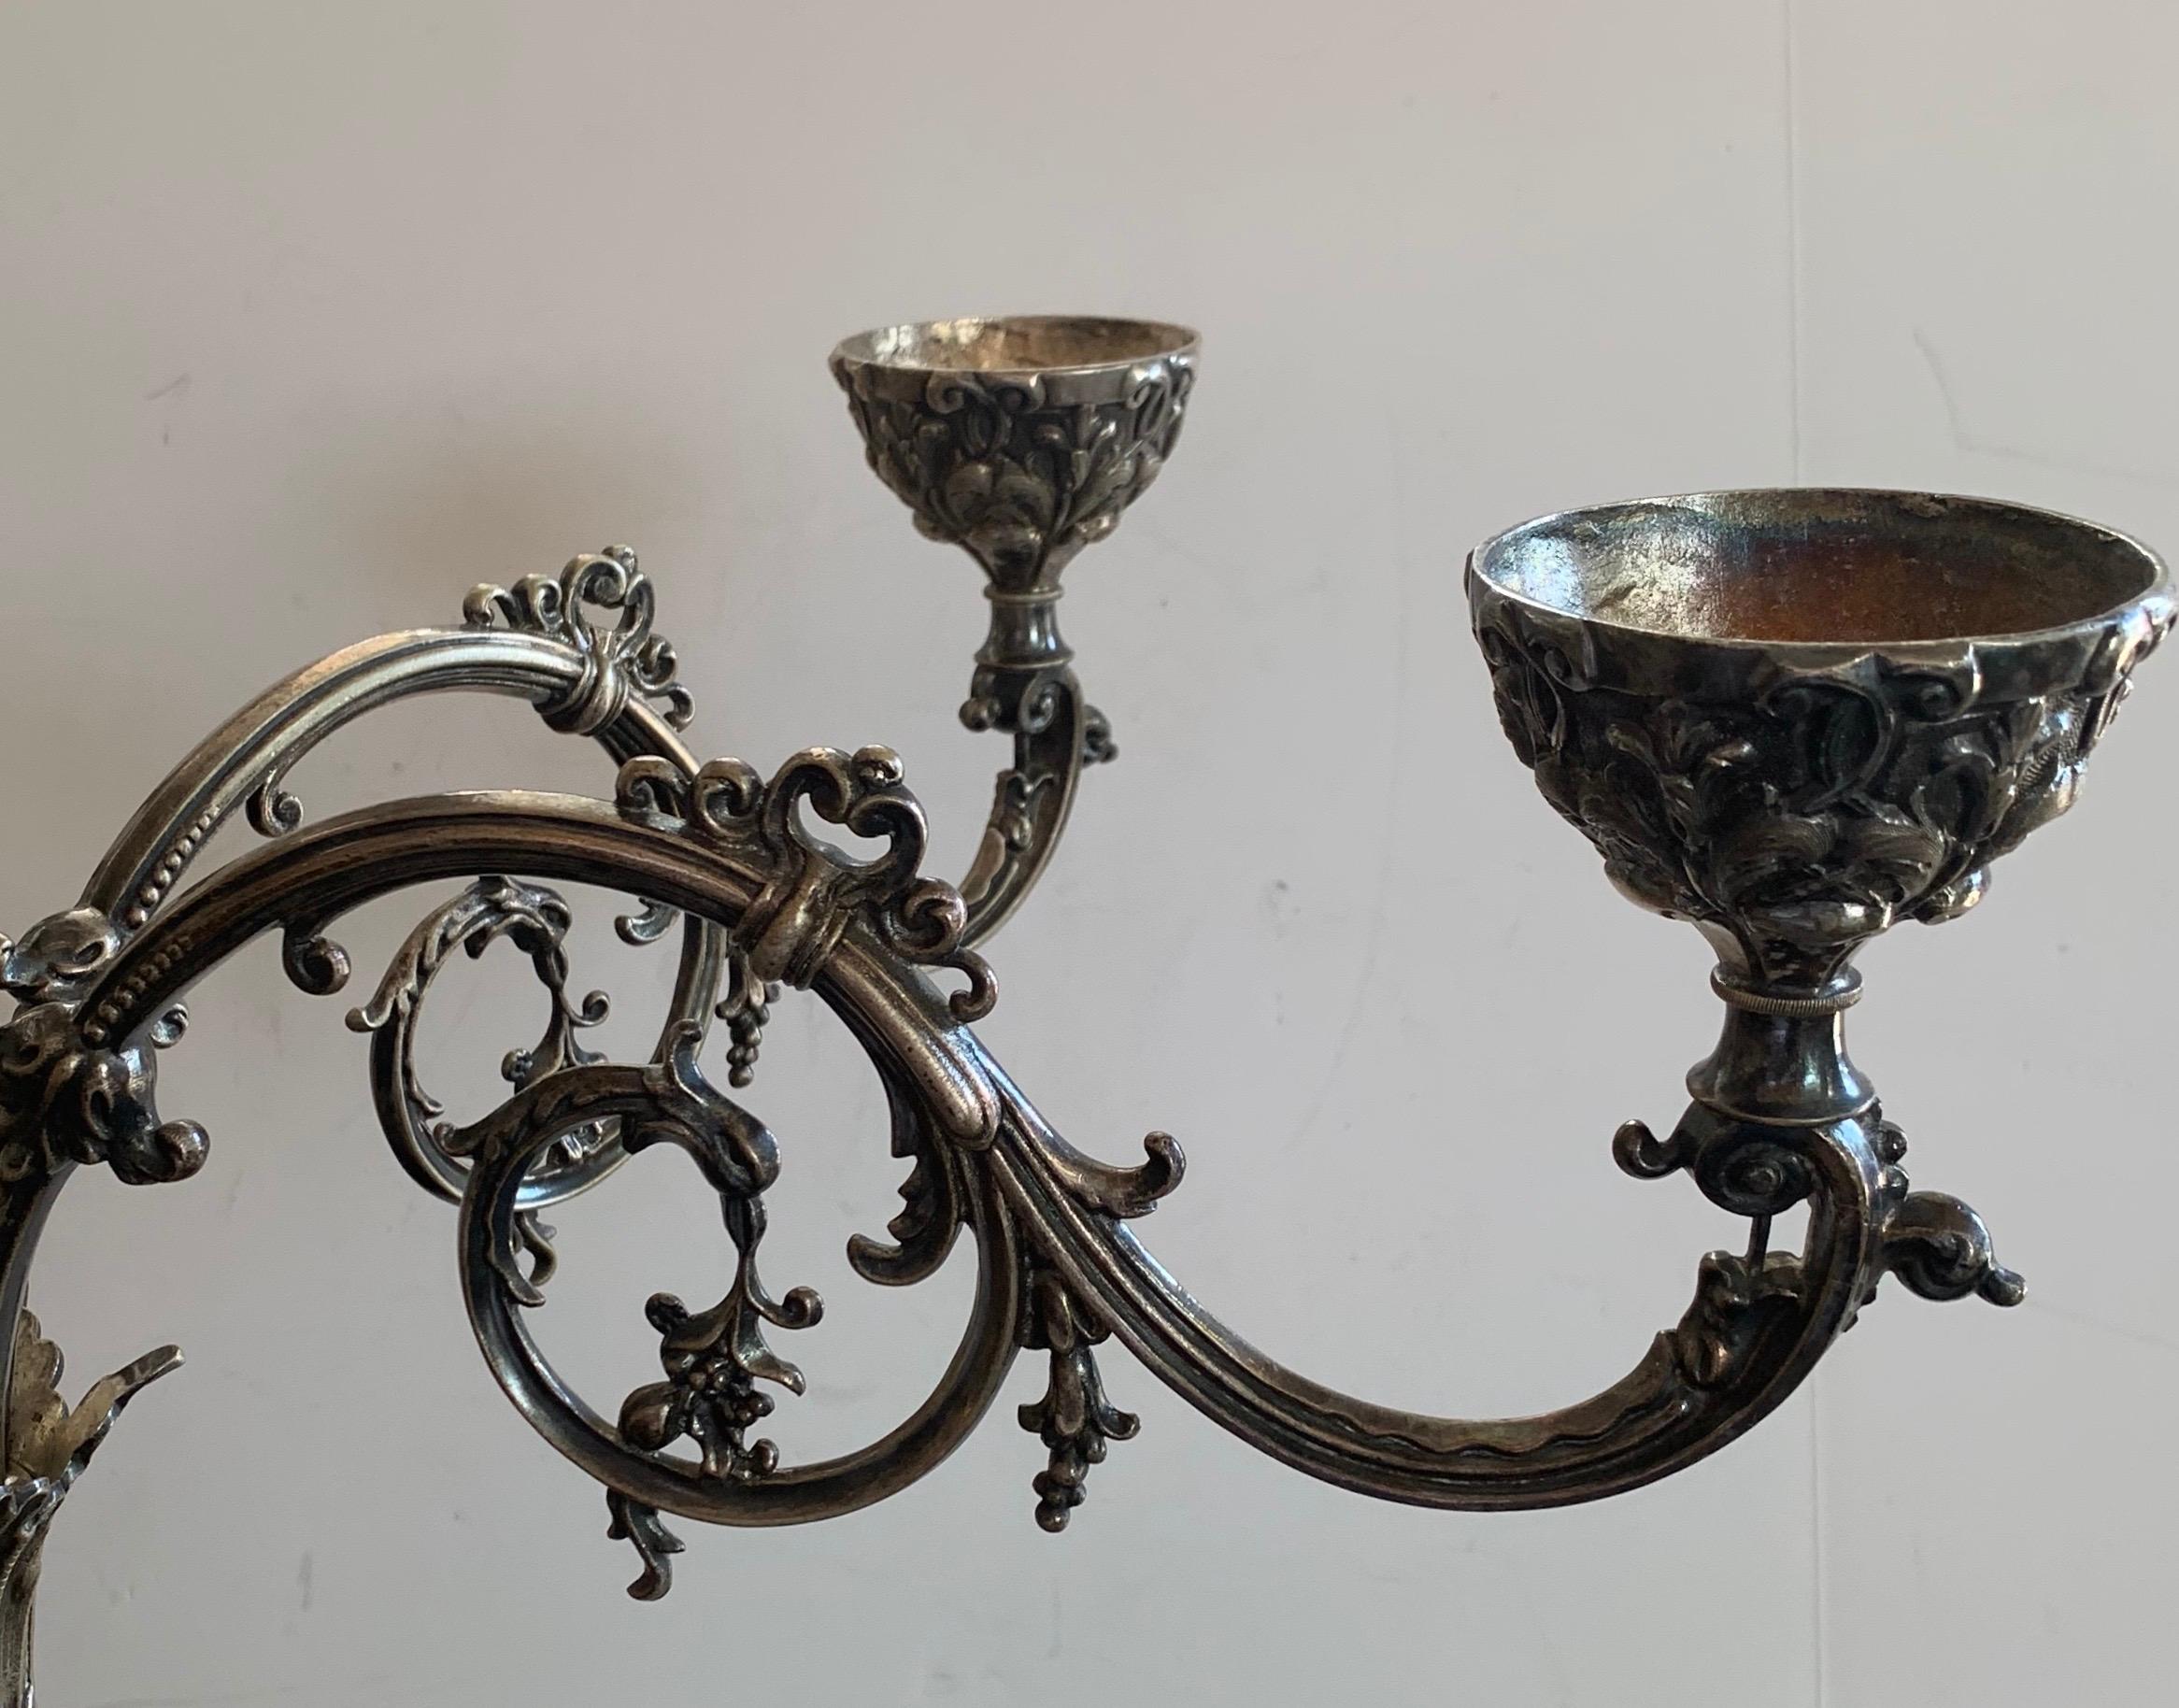 20th Century Monumental Fine Neoclassical 3 Figure English Silver Plated Epergne Candelabra